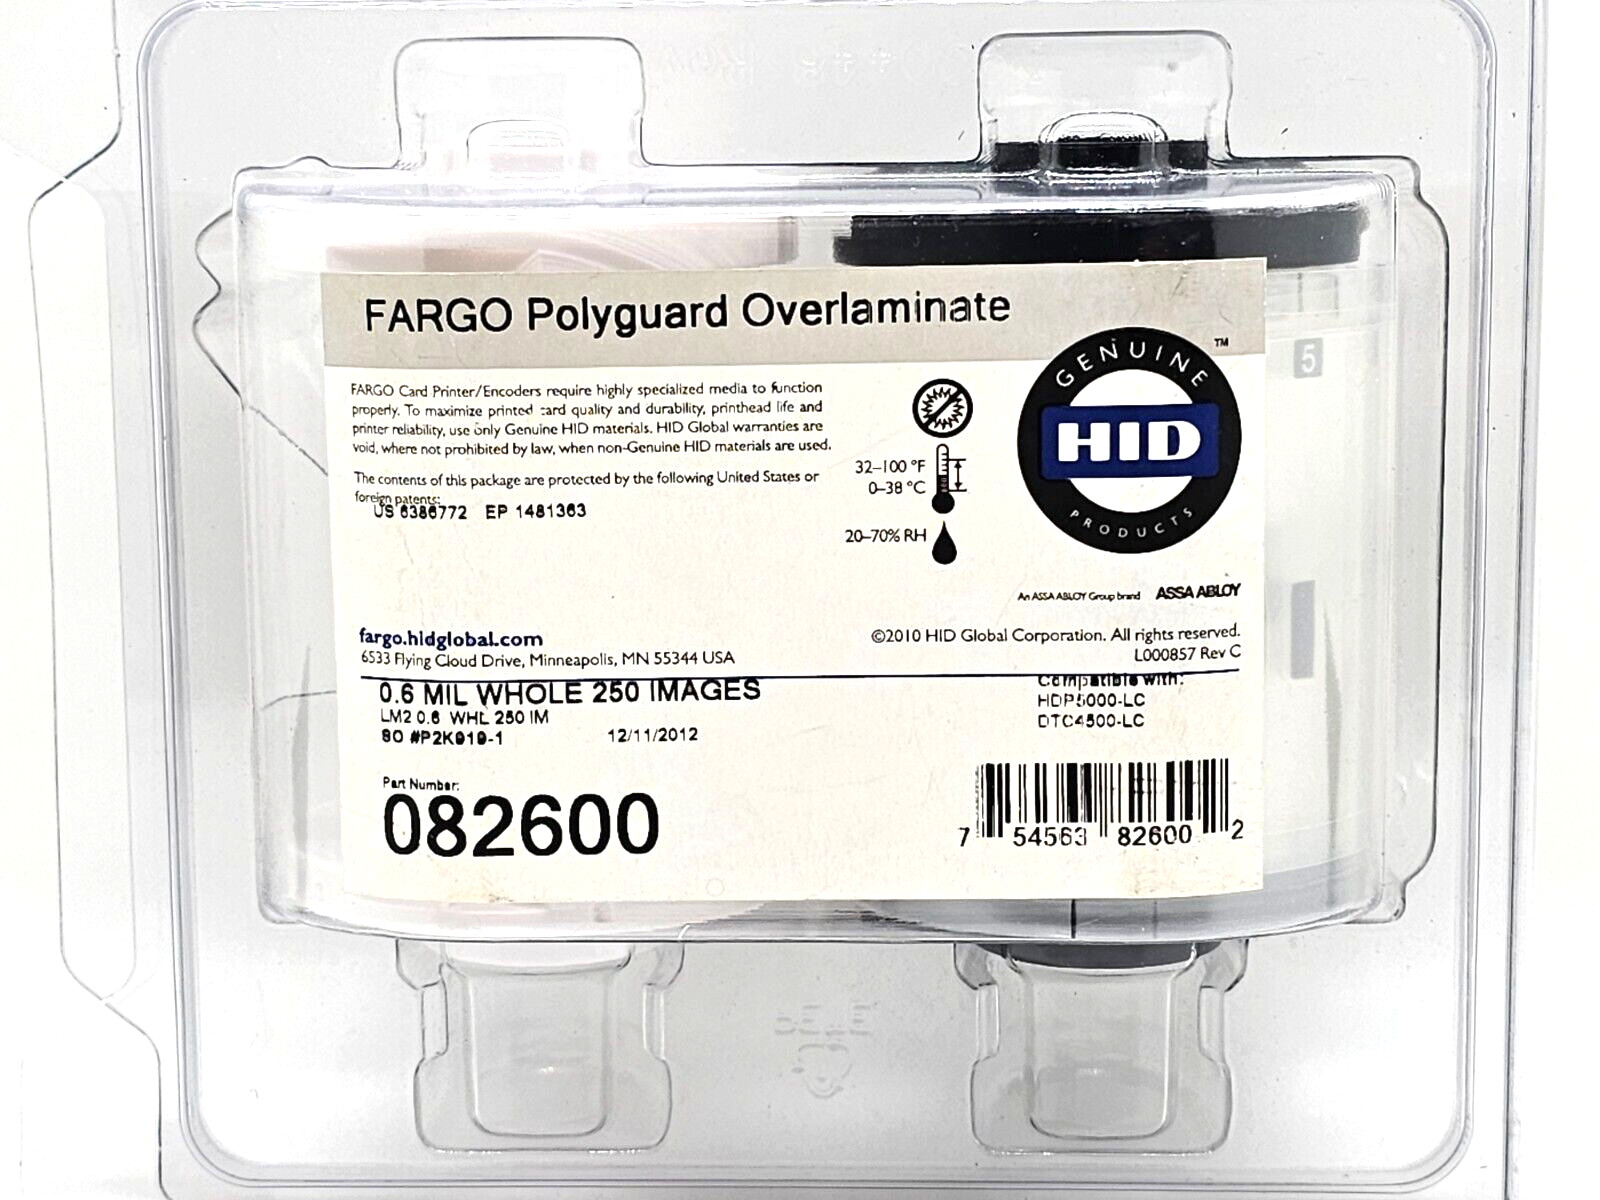 NEW HID 082600 Fargo Polyguard Overlaminate 0.6MIL Whole 250 Images